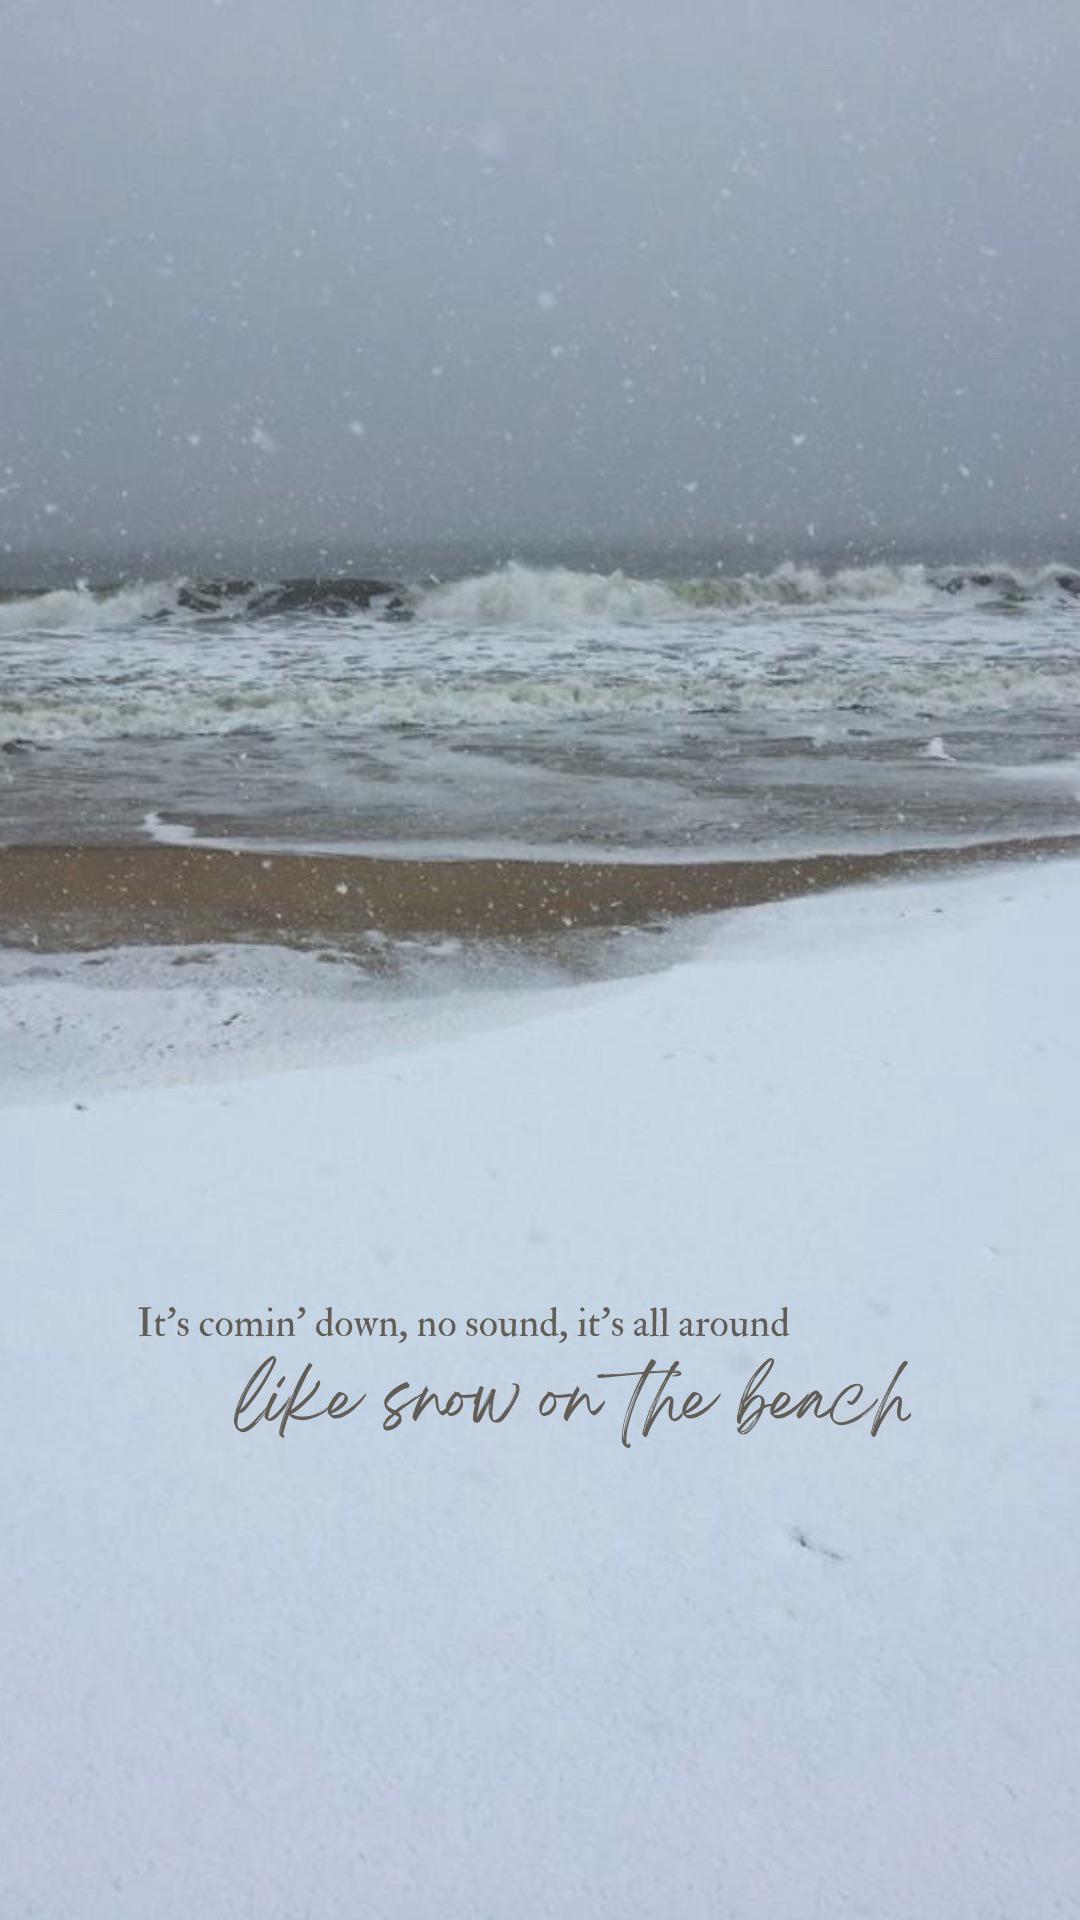 IPhone wallpaper of a snowy beach with the lyrics 